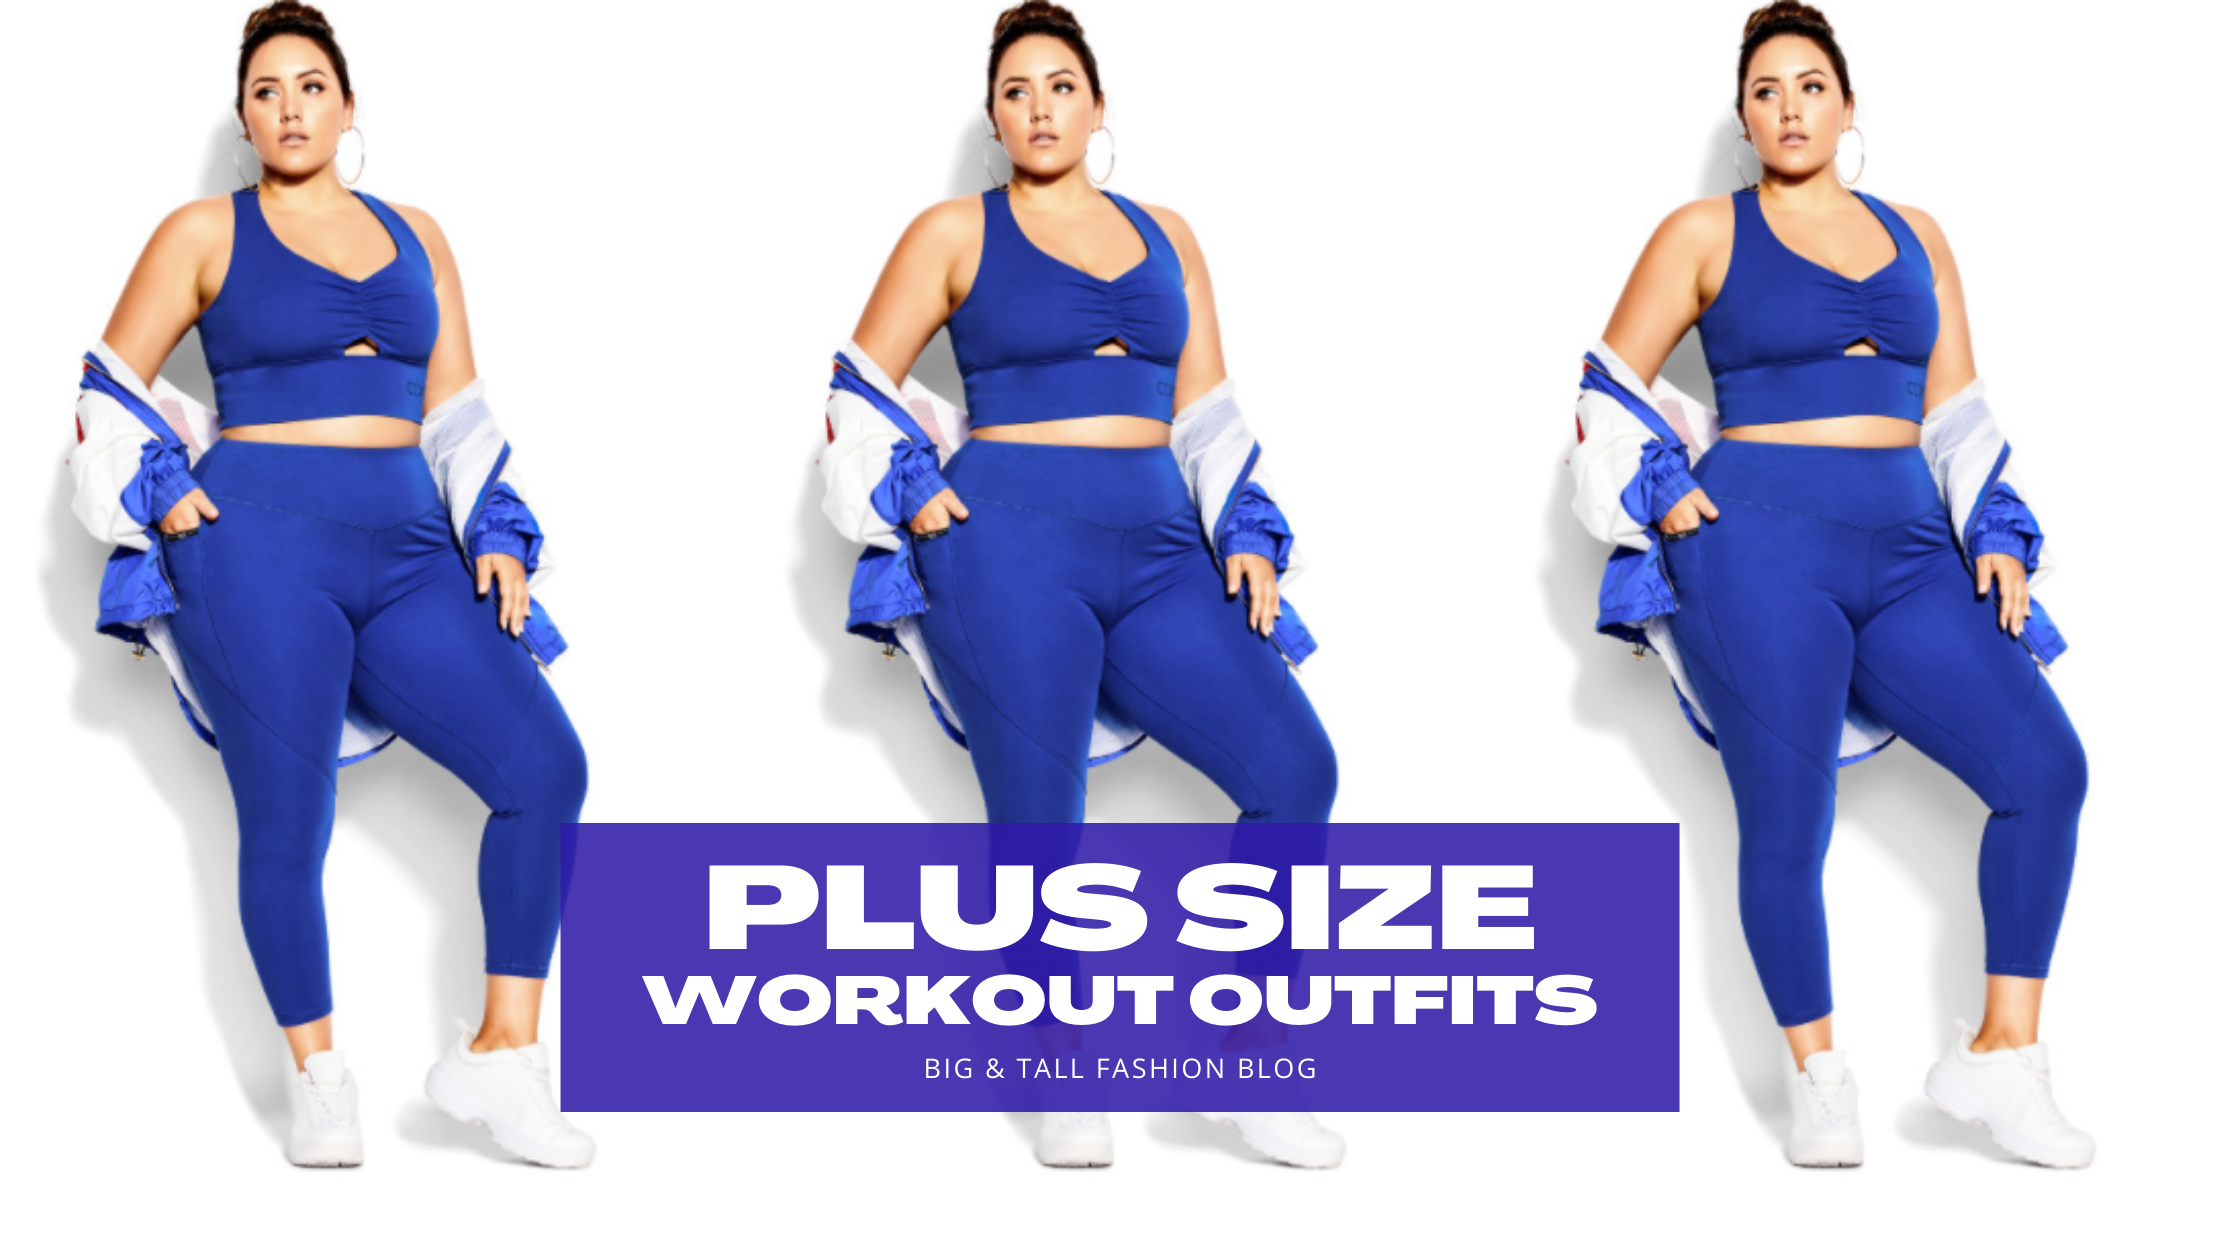 https://thehuntswoman.com/wp-content/uploads/2021/12/plus-size-workout-outfits-for-the-gym.png